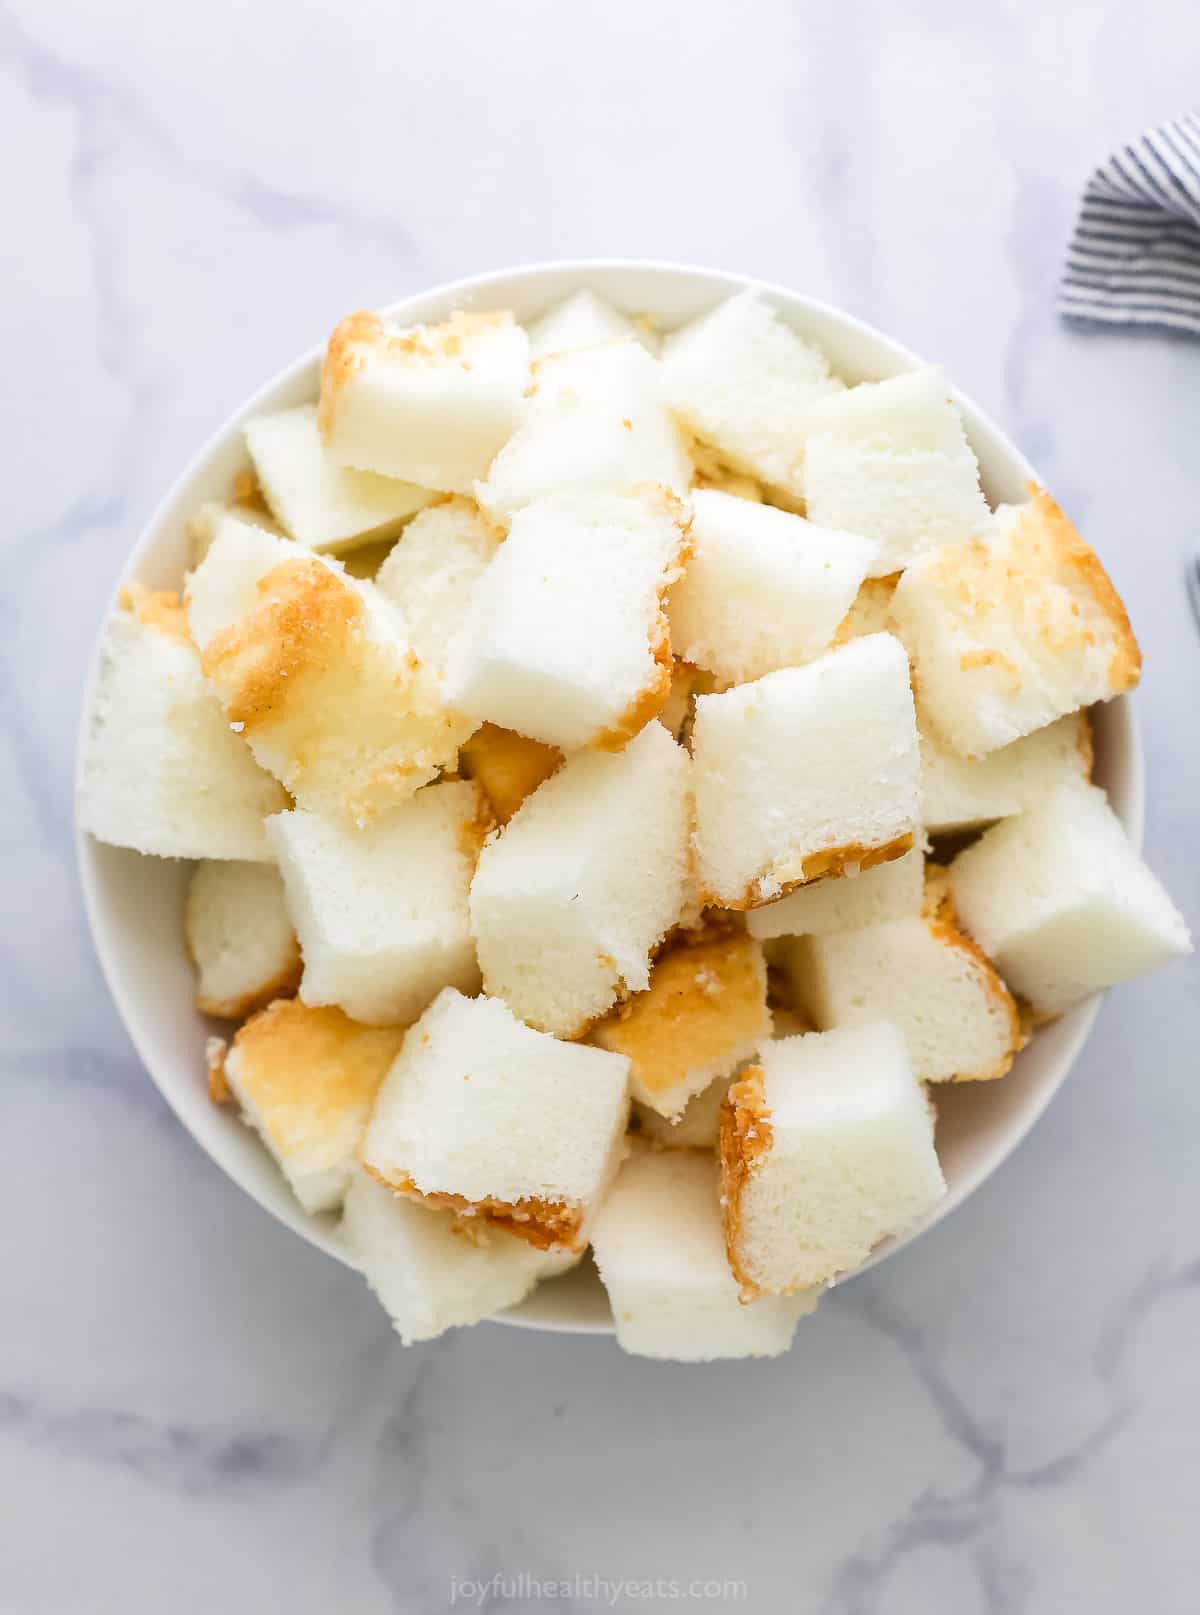 Cubes of angel food cake in a bowl on a marble countertop